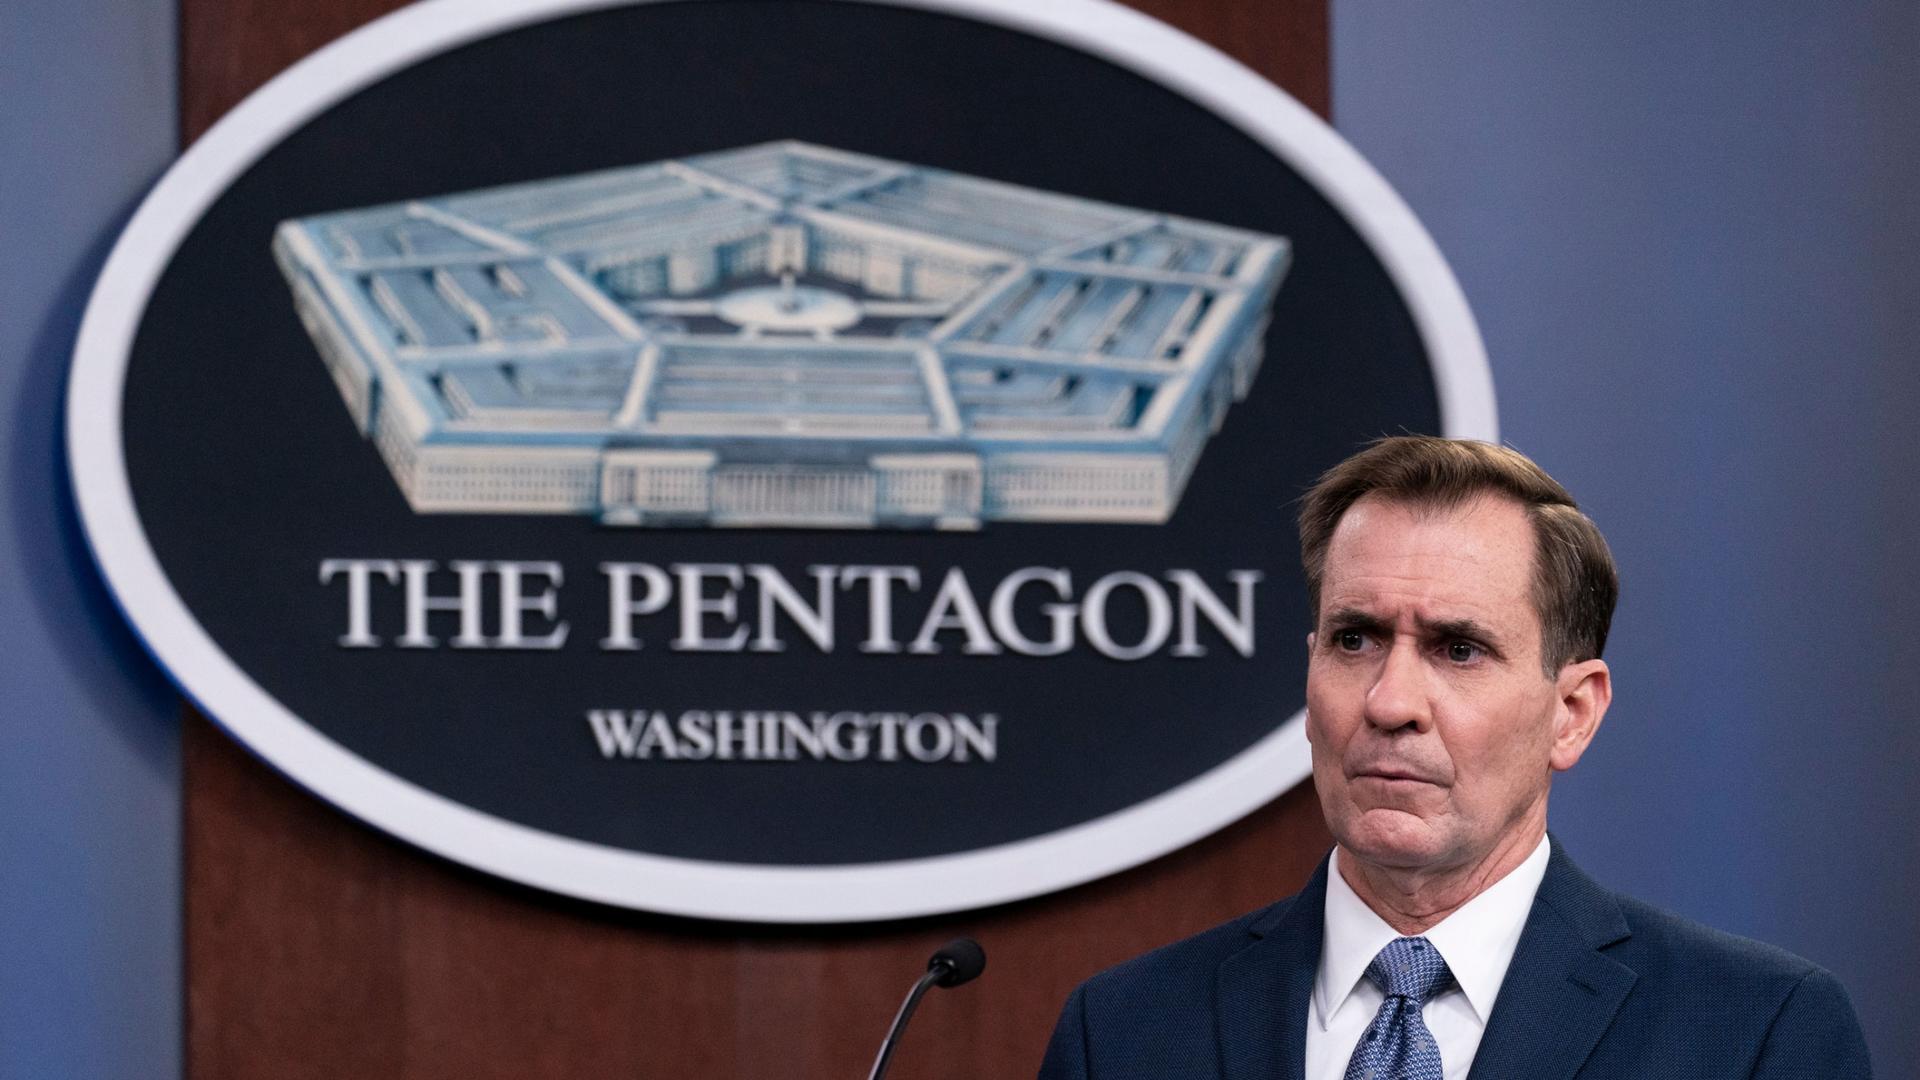 Pentagon spokesman John Kirby is shown wearing a dark blue suit and standing behind a microphone with the logo for the Pentagon behind him.